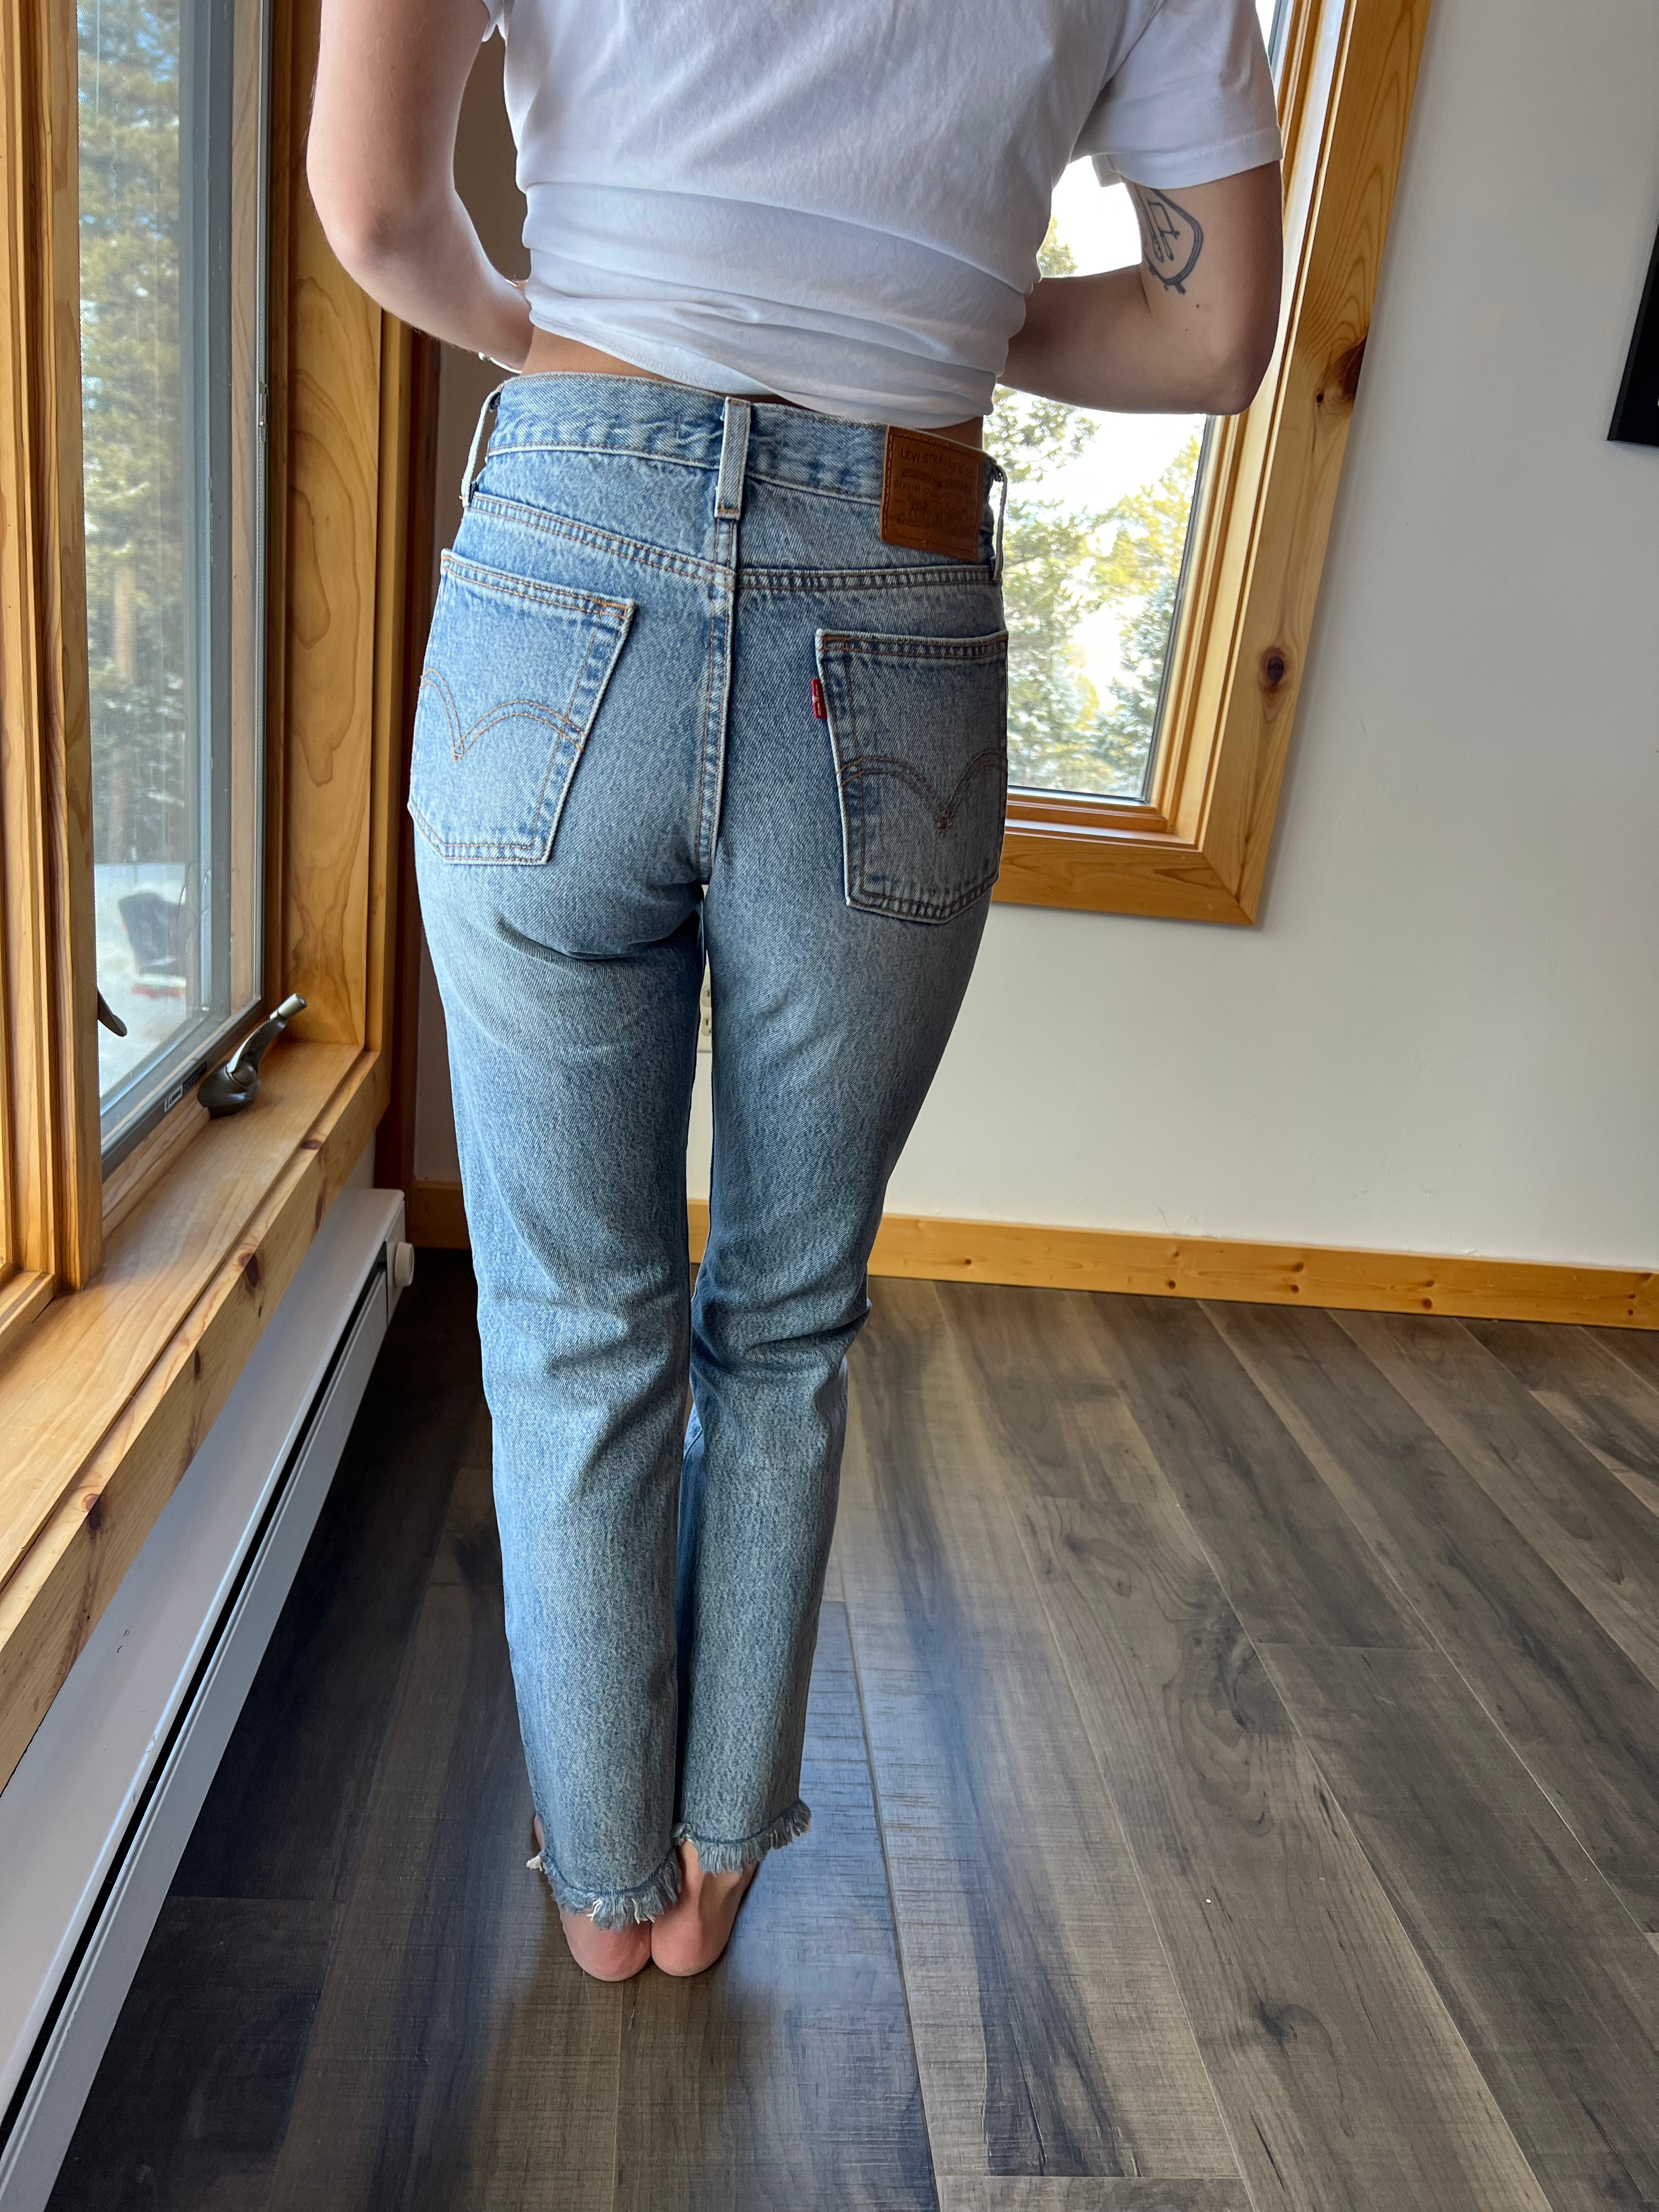 29: Levi's Wedgie Jeans